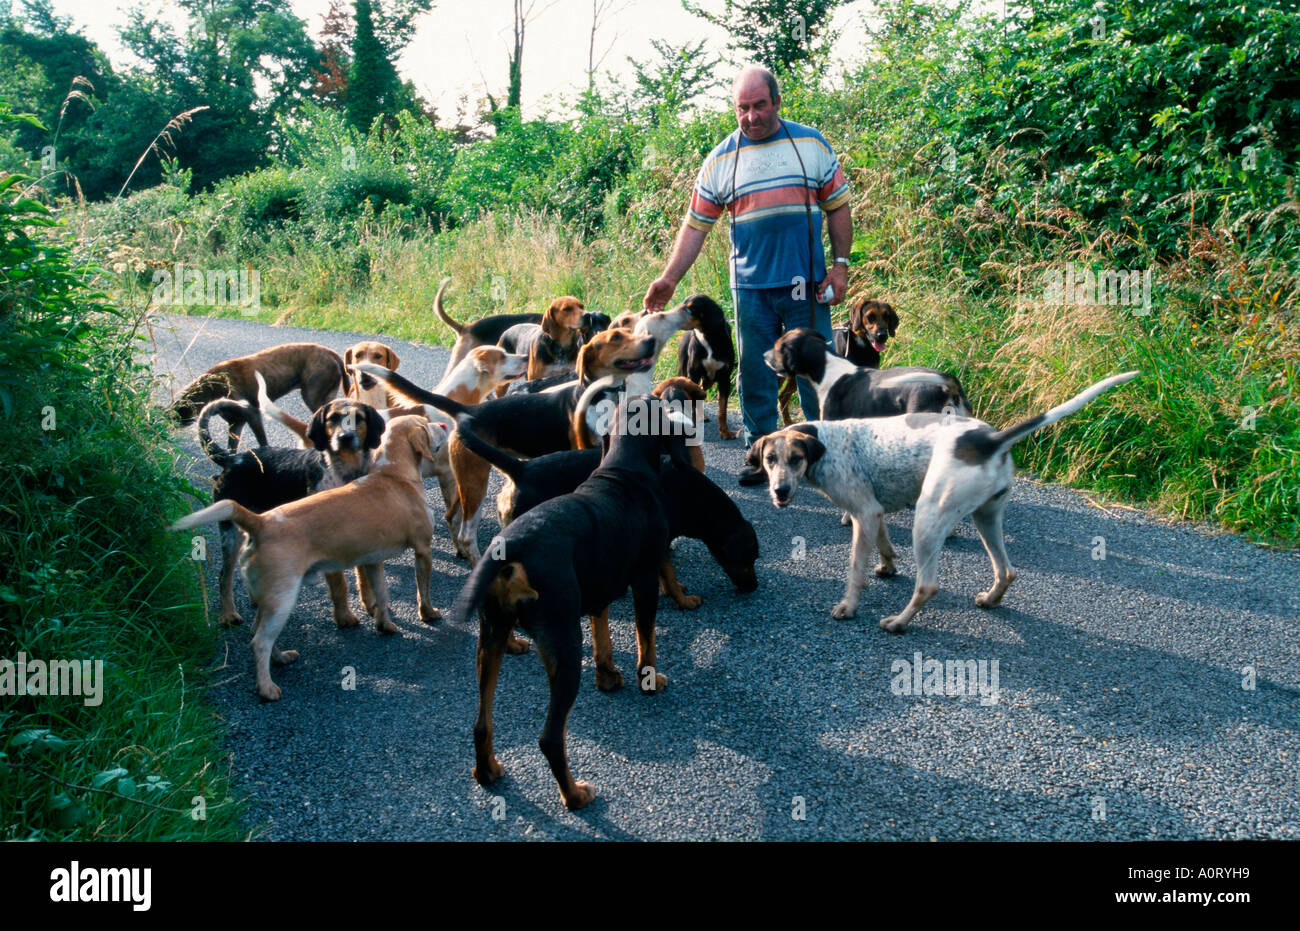 Man with hunting dogs Stock Photo